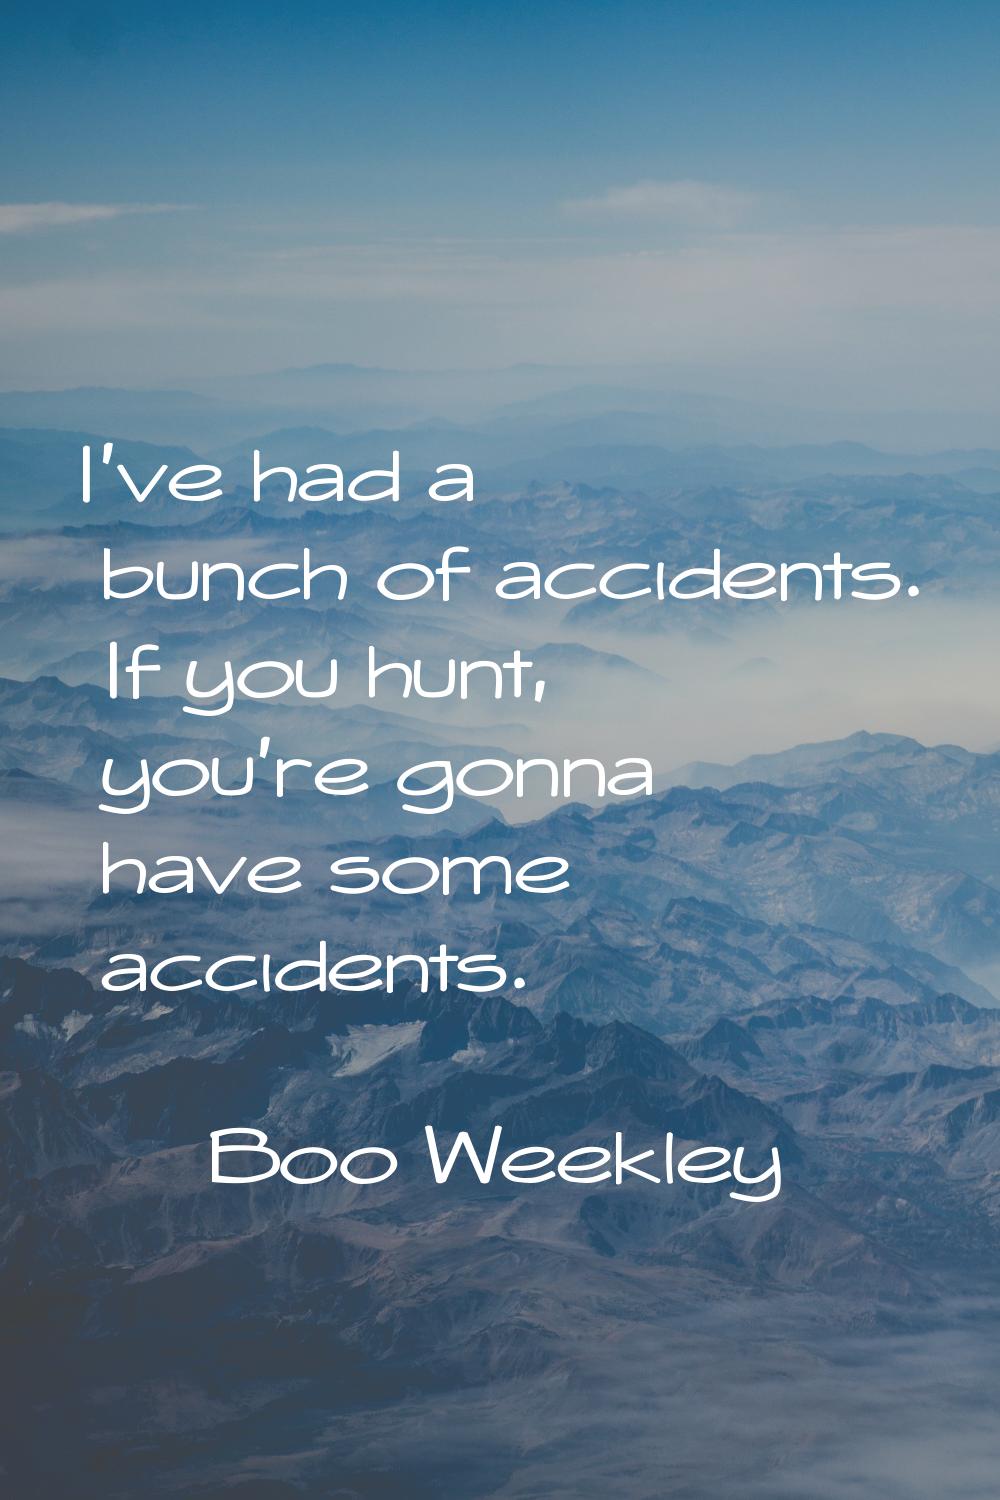 I've had a bunch of accidents. If you hunt, you're gonna have some accidents.